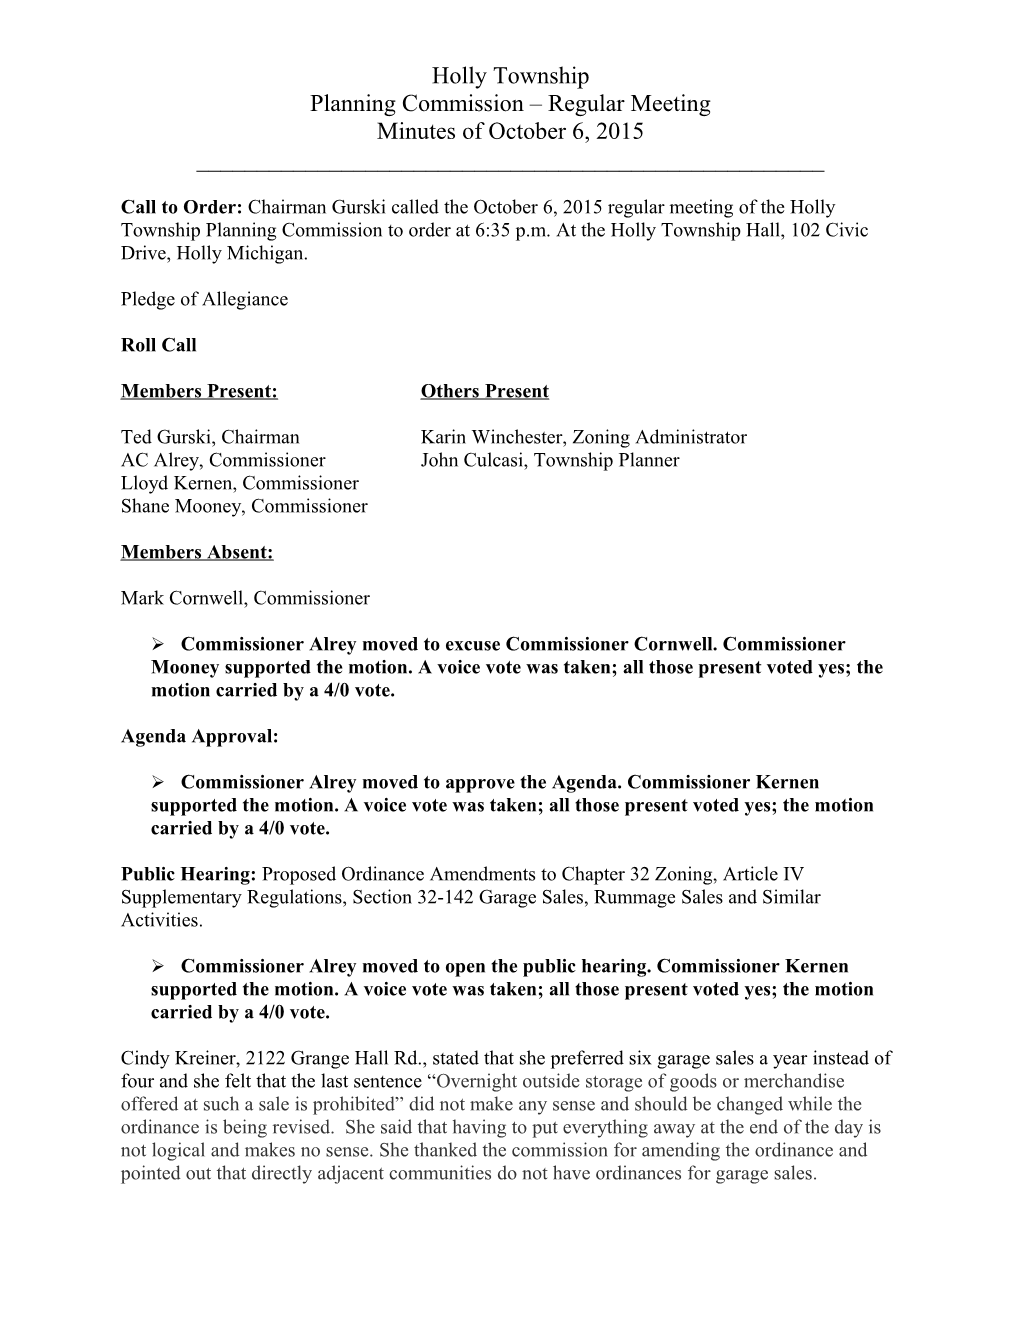 Holly Township Planning Commission Regular Meeting Minutes October 6, 2015Page 1 of 3